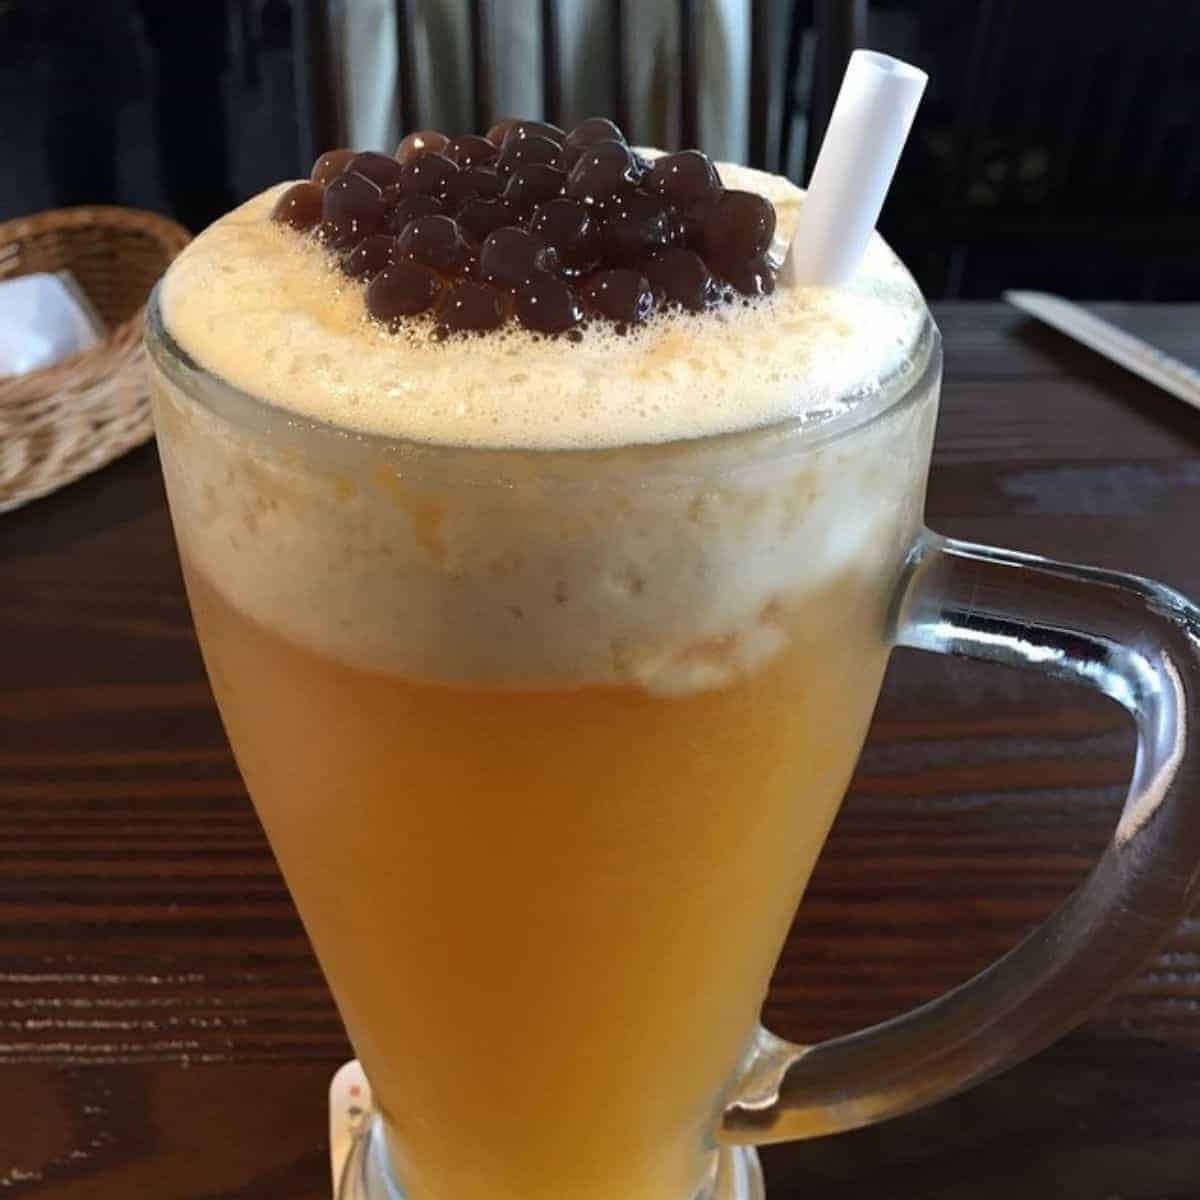  A full glass of fruity beverage with bubbles on top and black tapioca pearls.